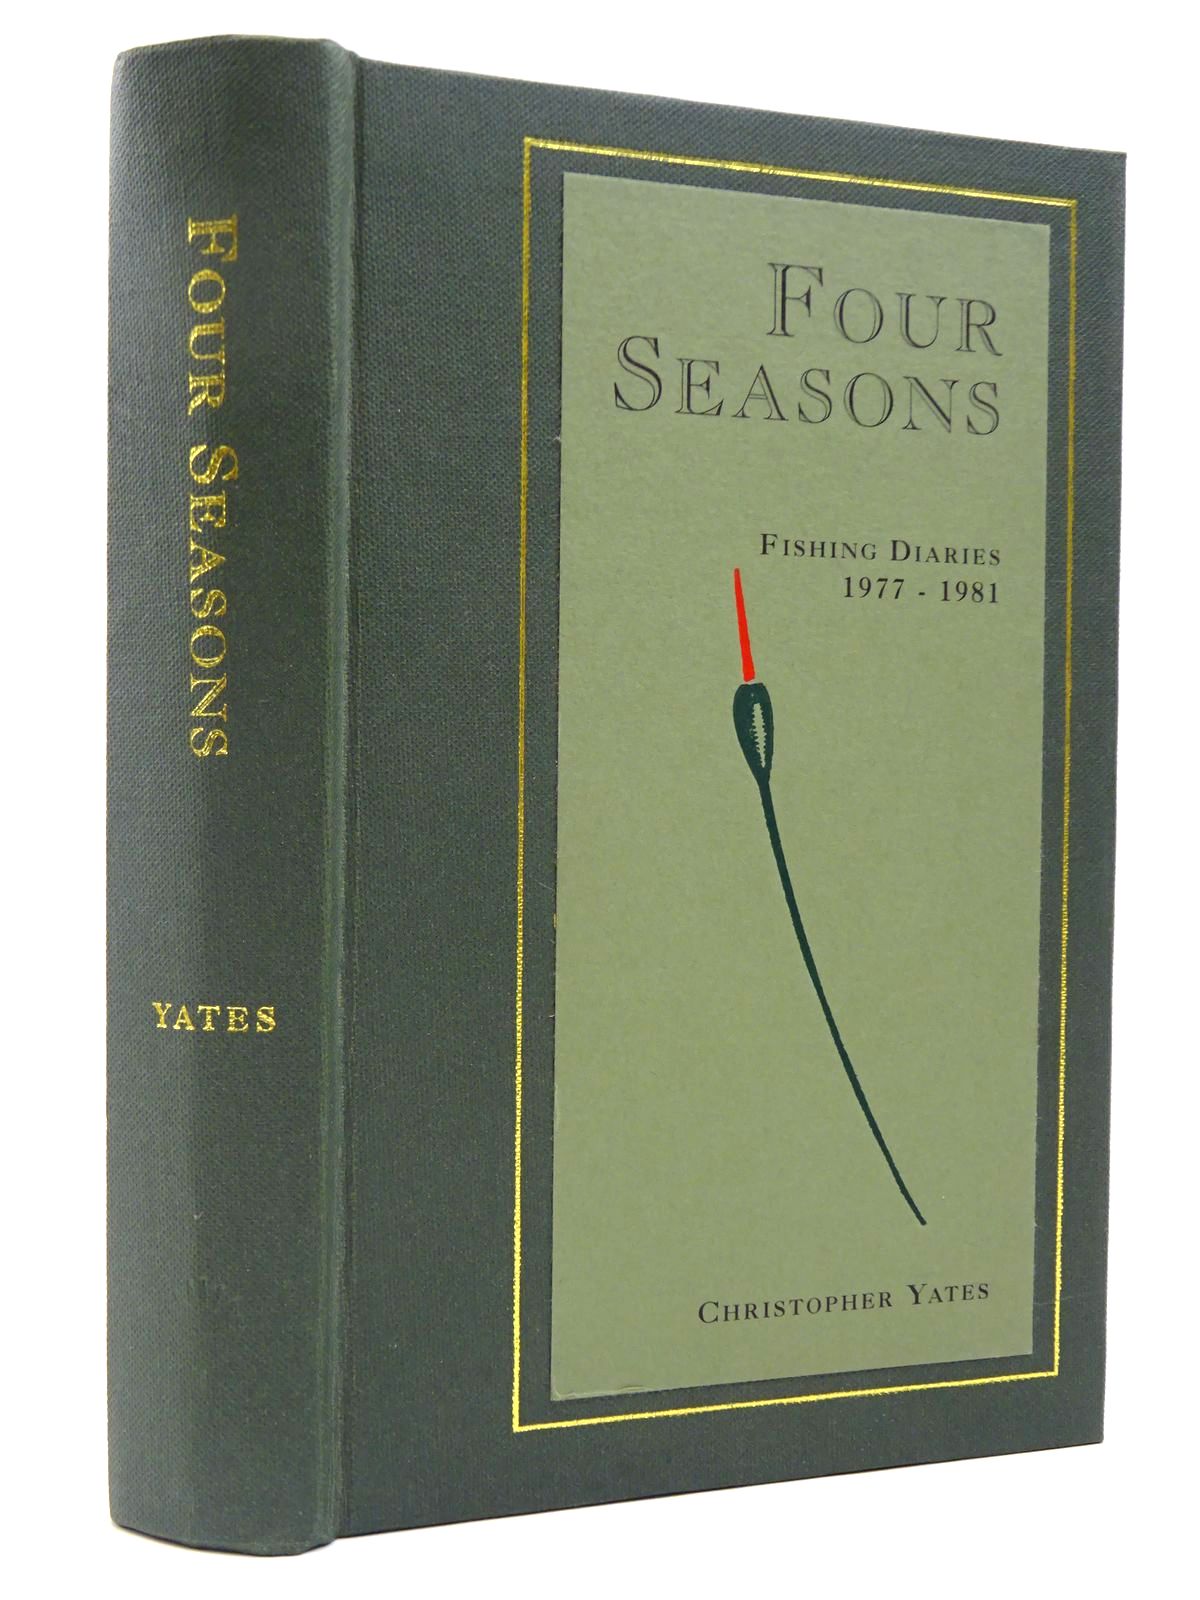 Photo of FOUR SEASONS BEING THE FISHING DIARIES OF CHRISTOPHER YATES JUNE 1977 - MARCH 1981 written by Yates, Christopher published by The Medlar Press (STOCK CODE: 2129556)  for sale by Stella & Rose's Books